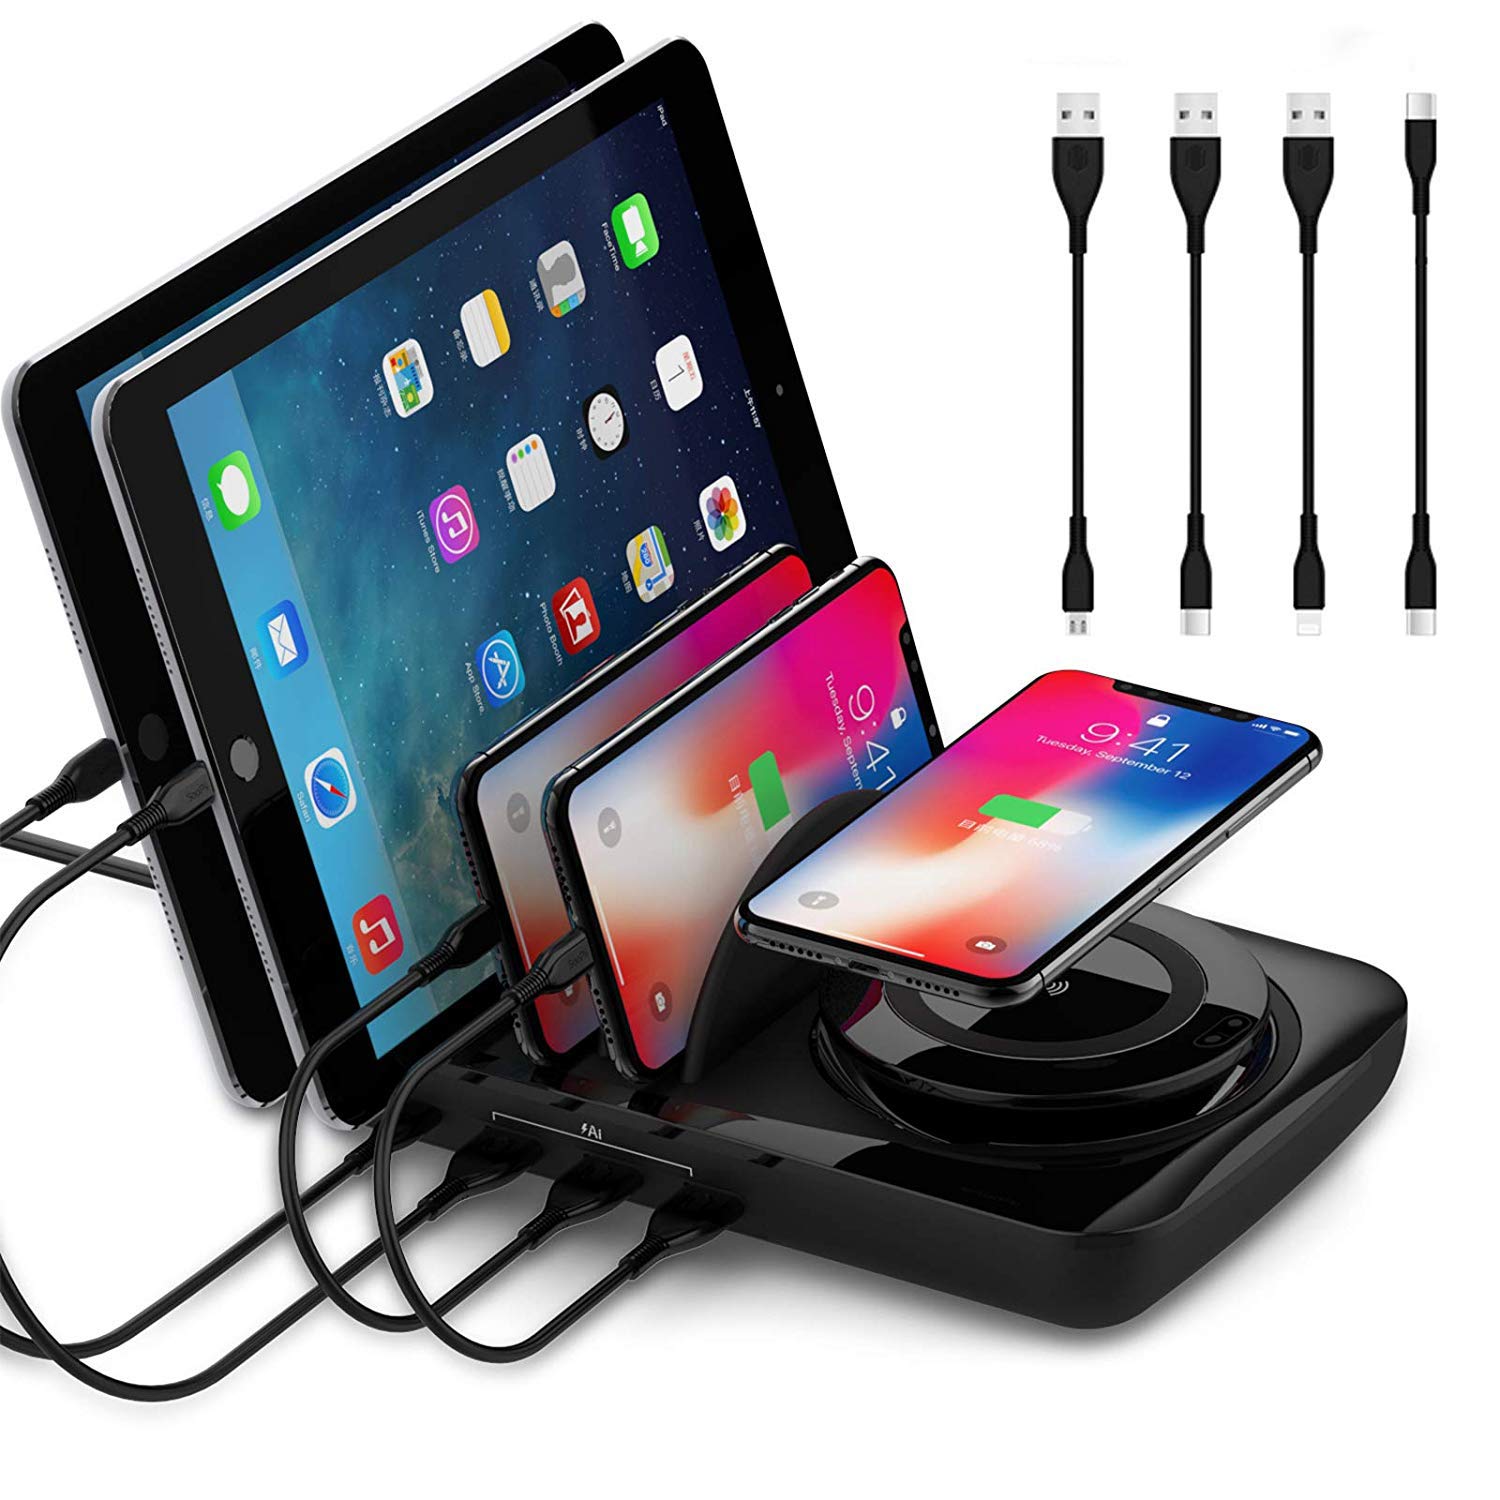 Soopii Wiv6 - 5In1 - 4 Ports Usb and Wireless Charging Station - Black